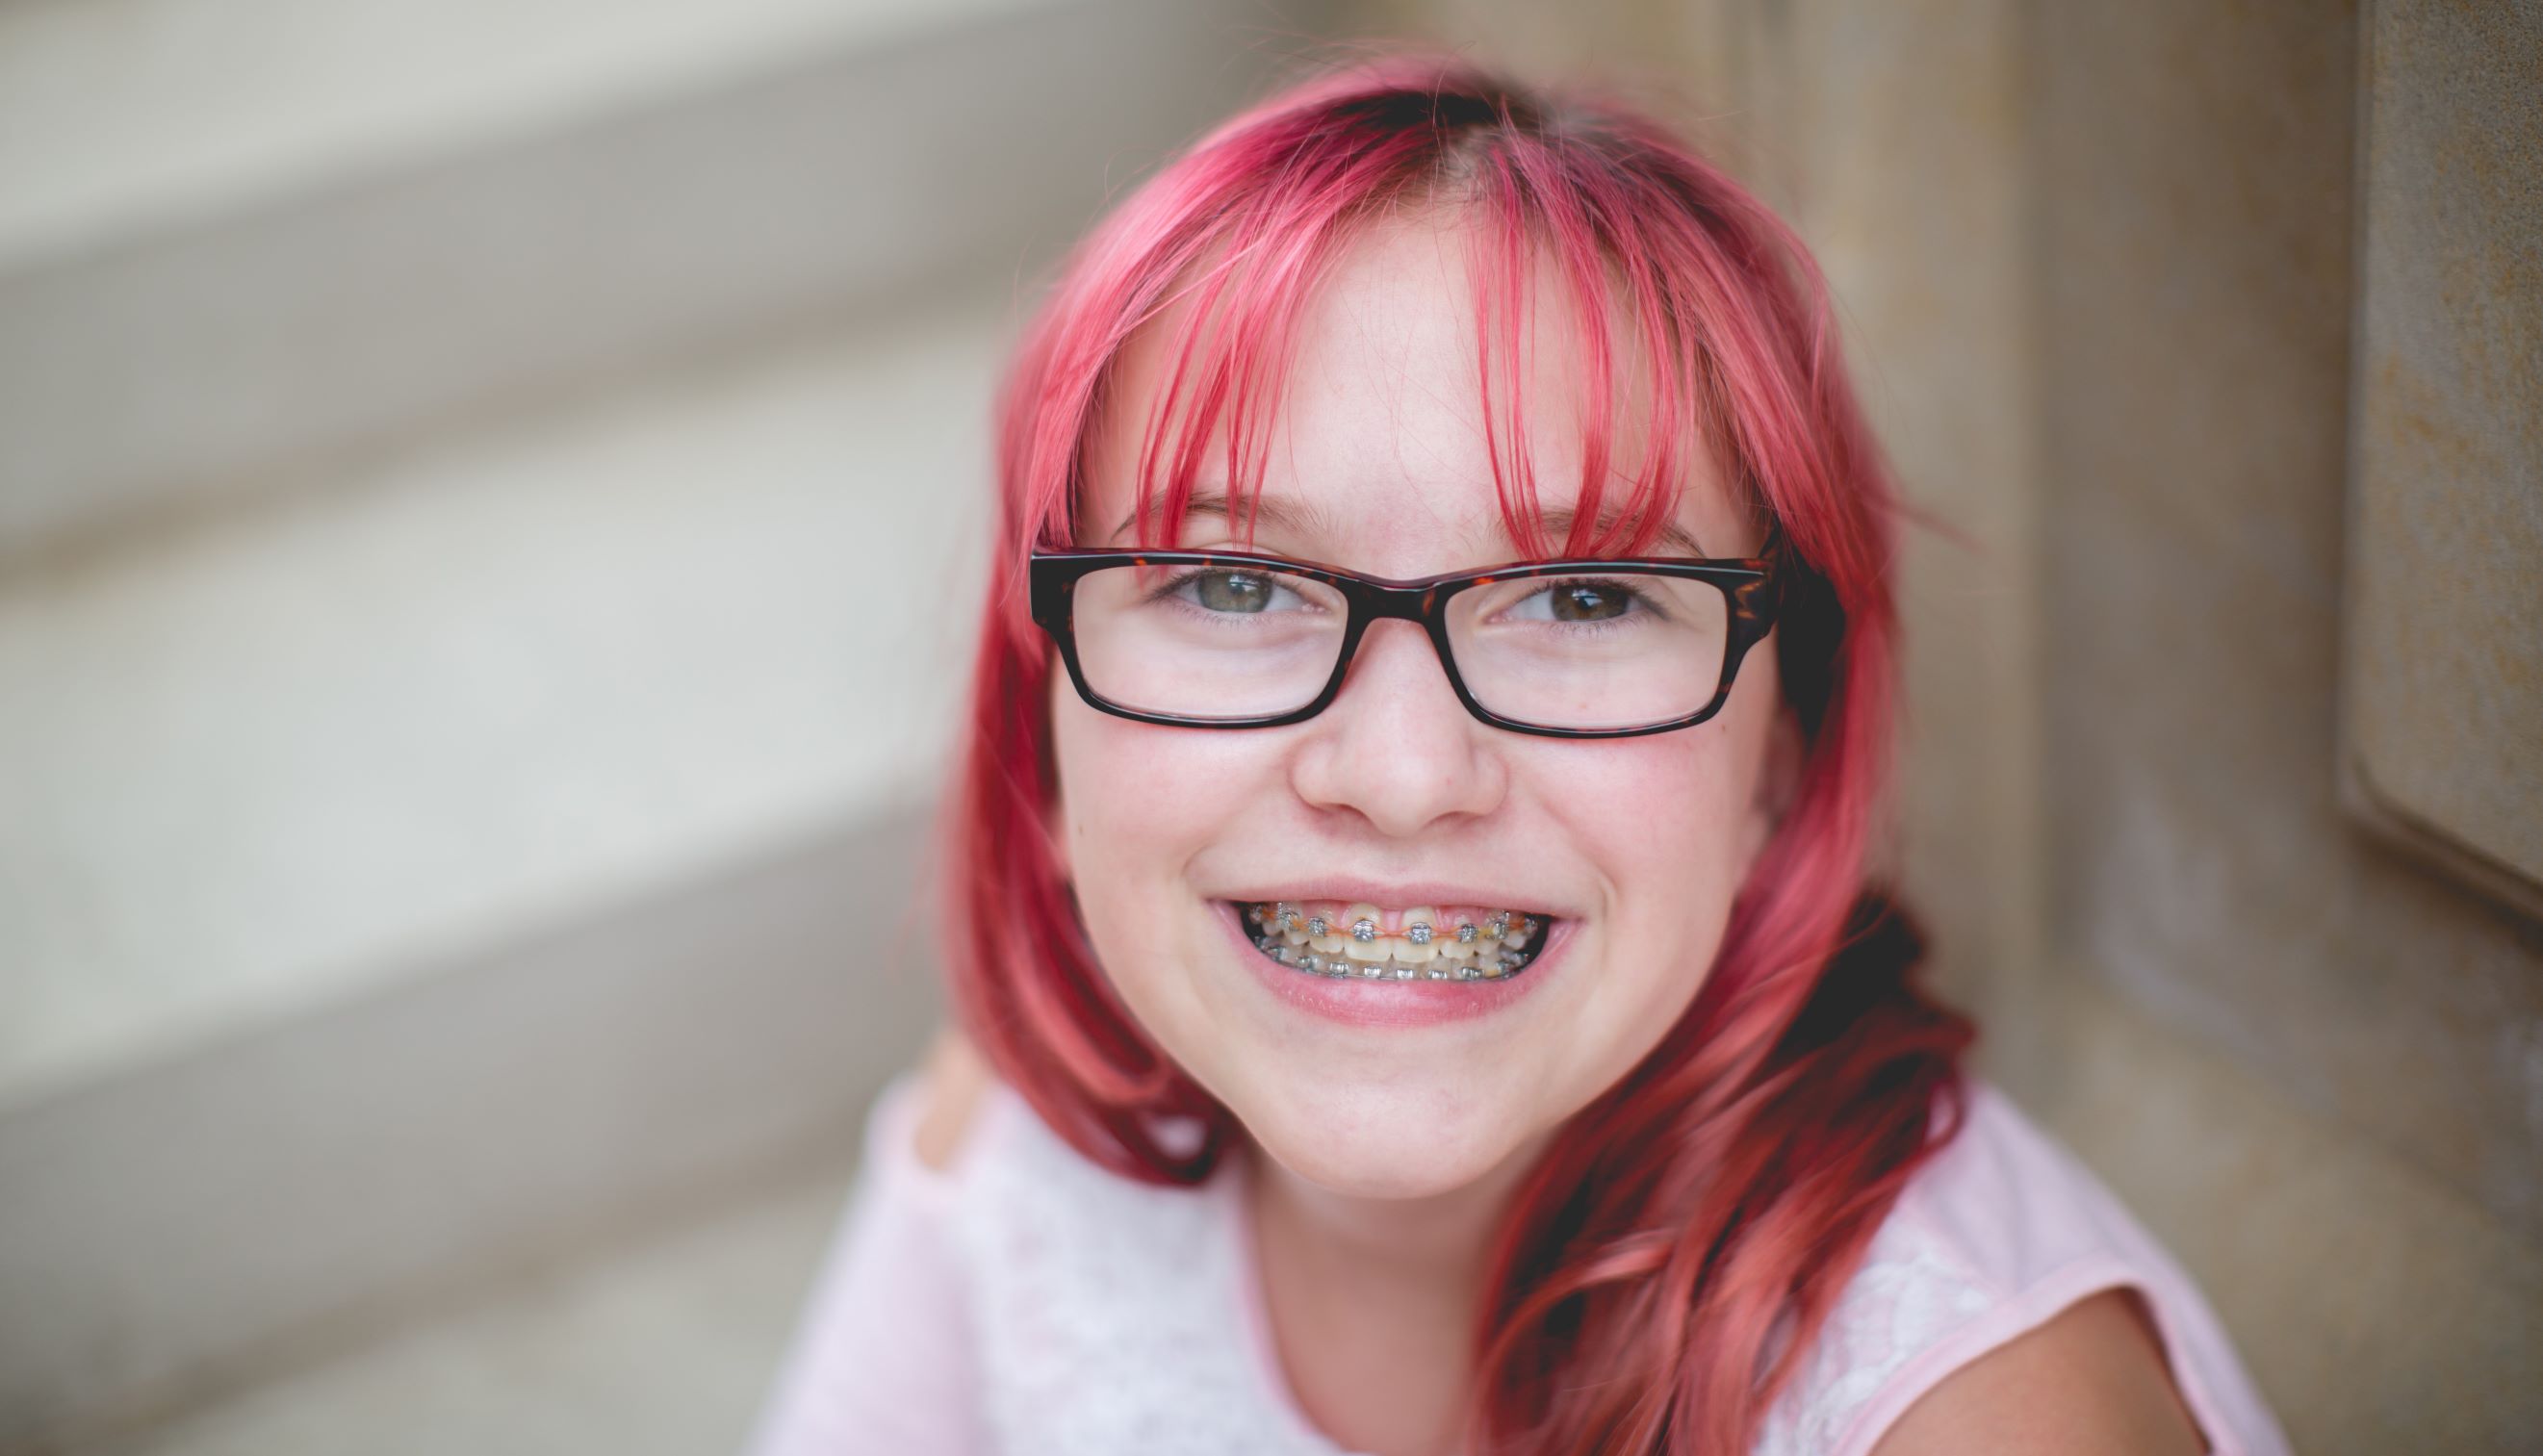 Girl with pink hair, glasses, and braces smiling at the camera